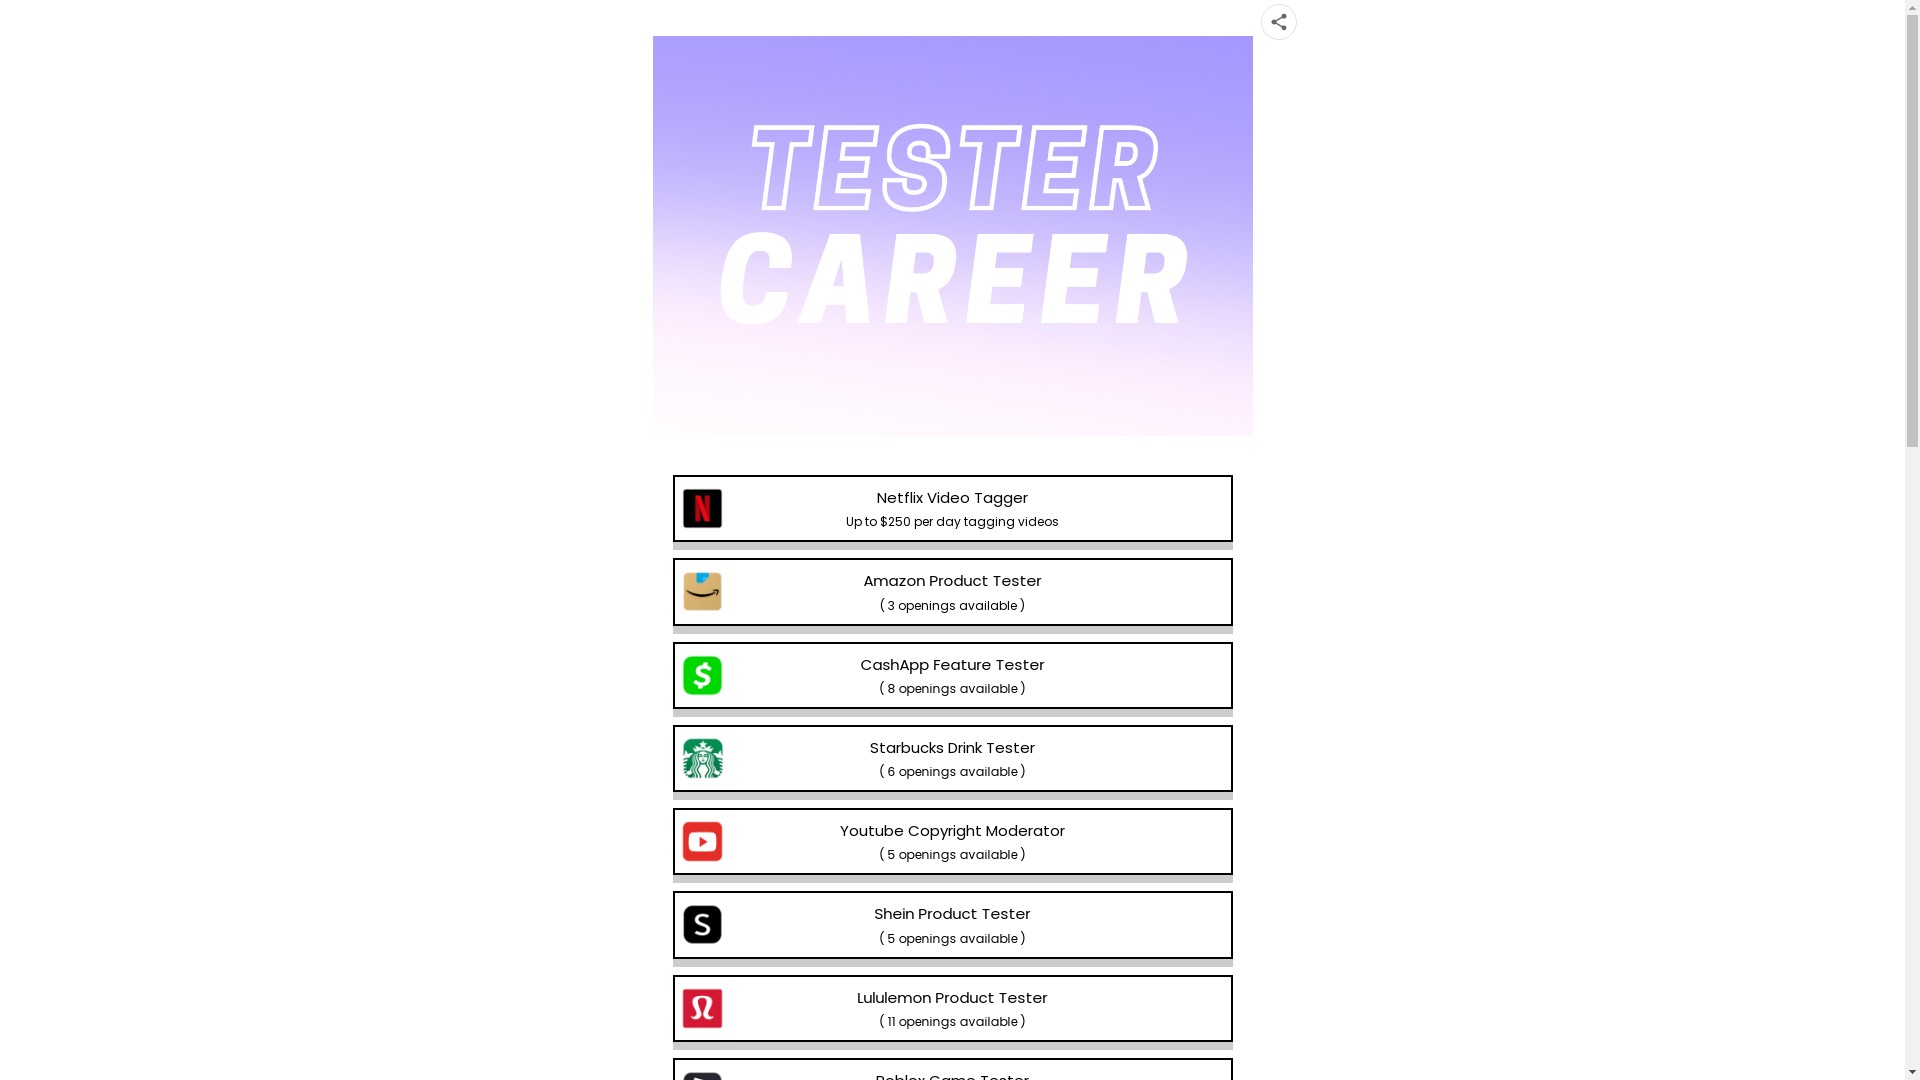 Tester Career located at testercareer.com